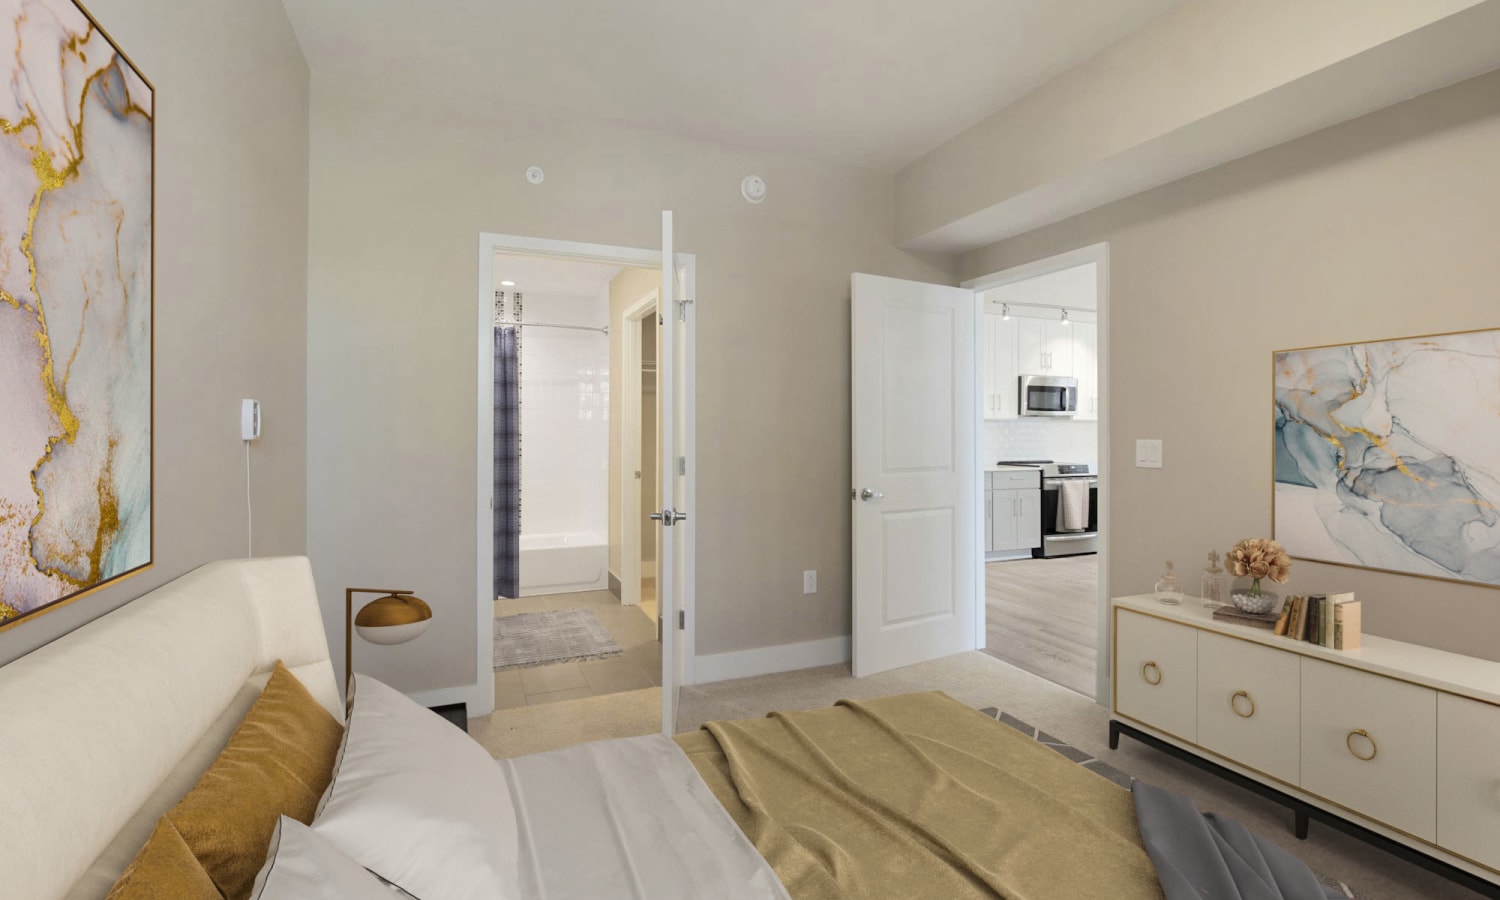 Bedroom with attached bathroom at Residences on The Lane in Rockville, Maryland